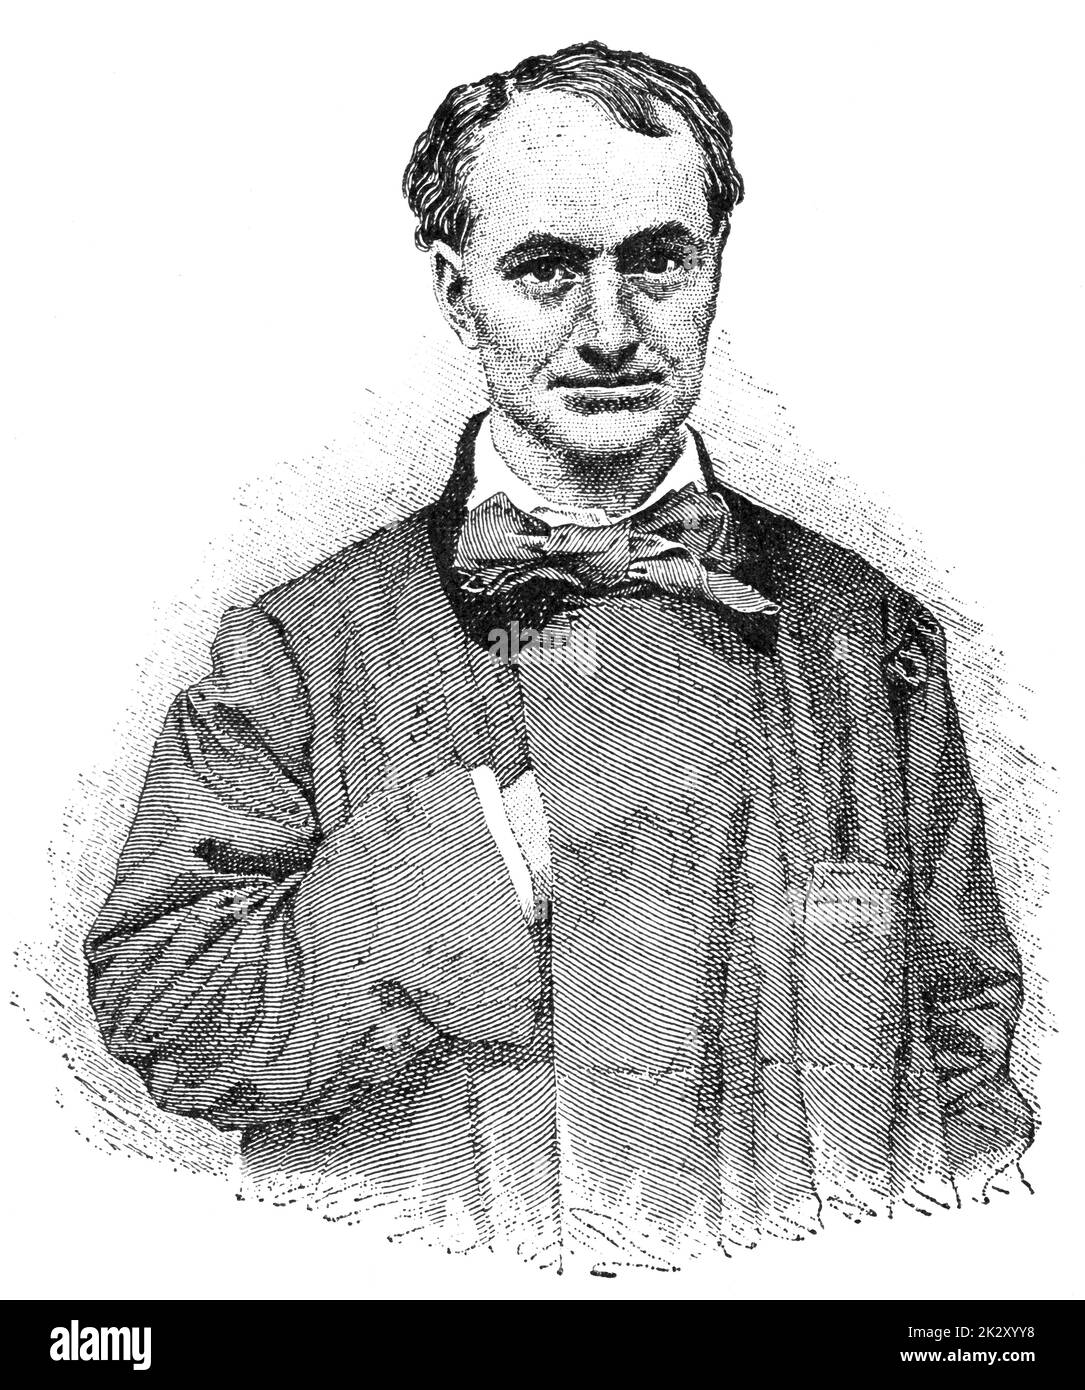 Baudelaire poe Black and White Stock Photos & Images - Alamy